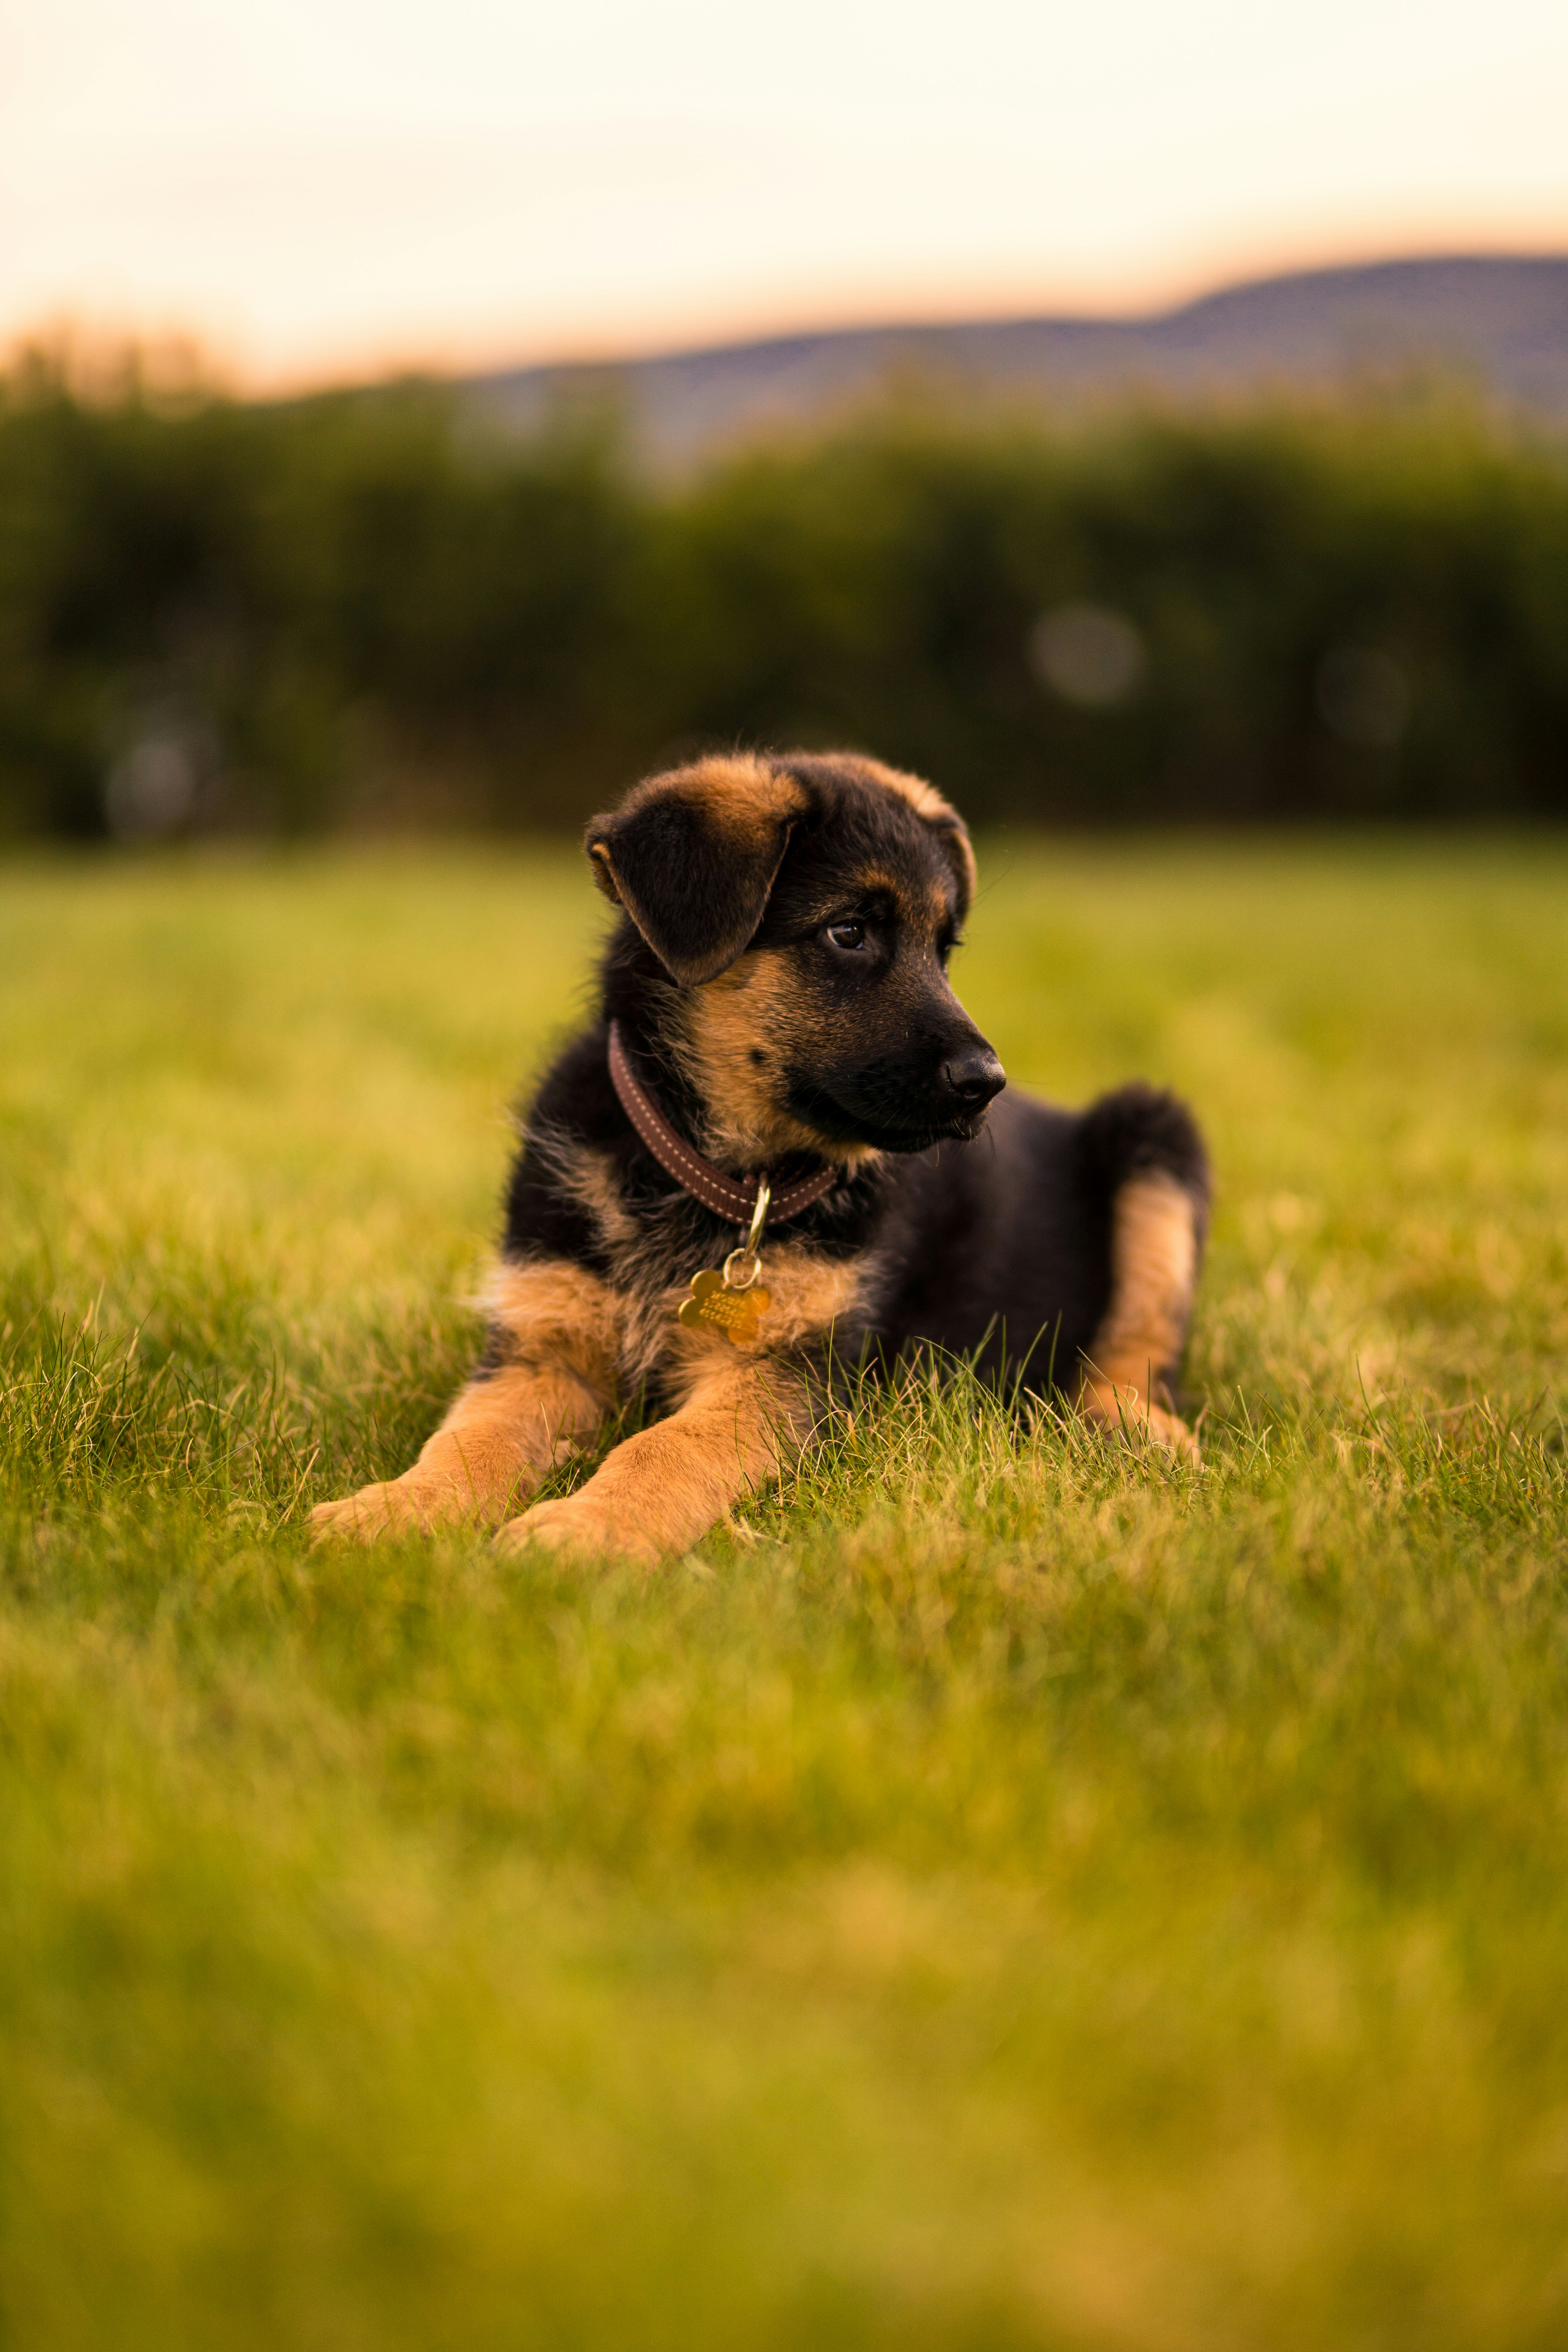 black and tan german shepherd puppy lying on green grass field during daytime